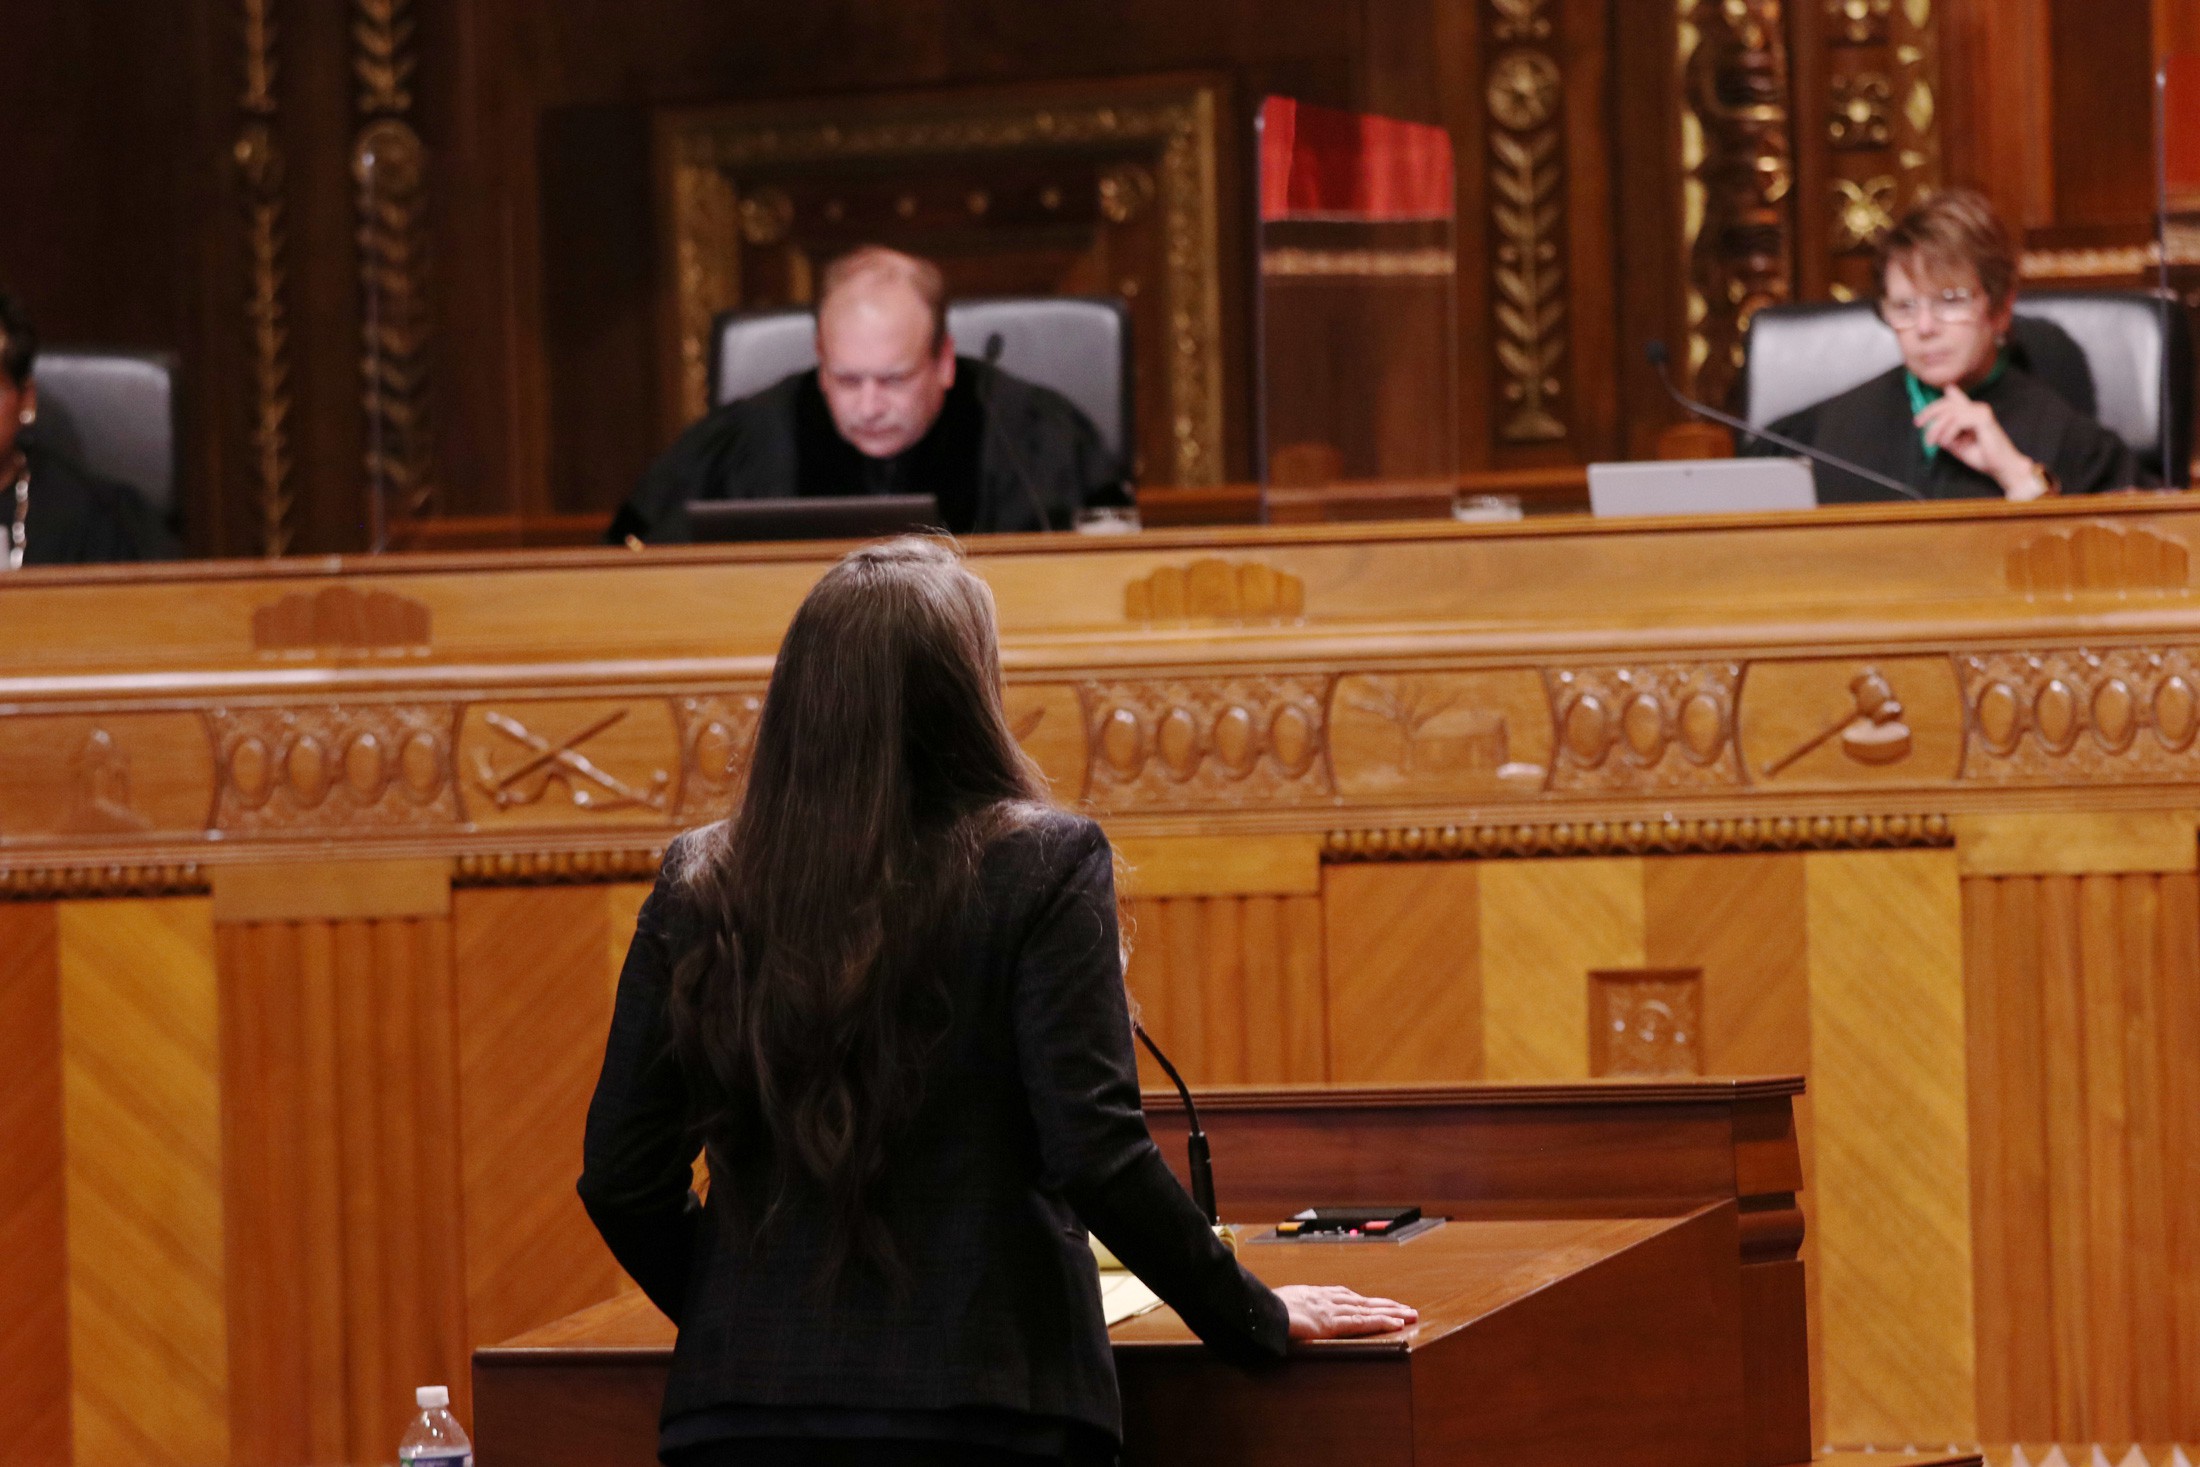 Image of a woman wearing a dark suit standing with her back to the camera and facing an ornate, wooden courtroom bench. Seated on the bench are a male and a female justice wearing black judicial robes.